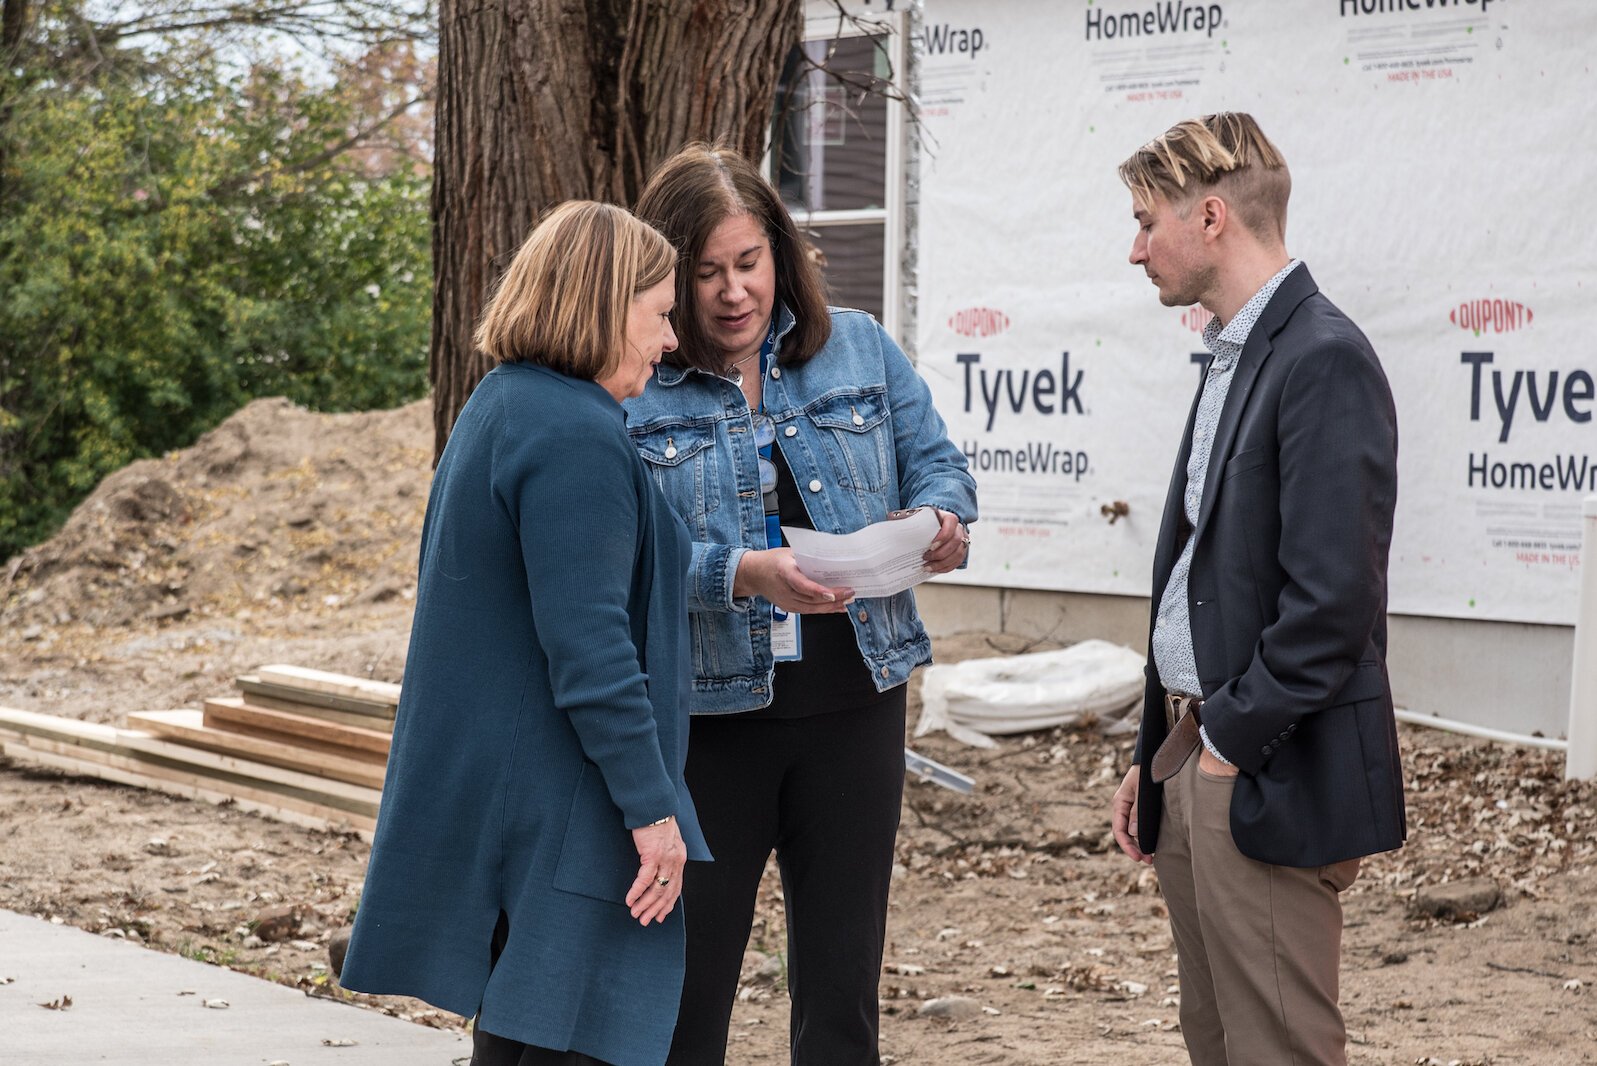 Sharilyn Parsons, housing development project coordinator for the City of Kalamazoo, center, talks with Beth McCann, acting executive director of KNHS, left, and Milcarek, director of construction services for KNHS, right.